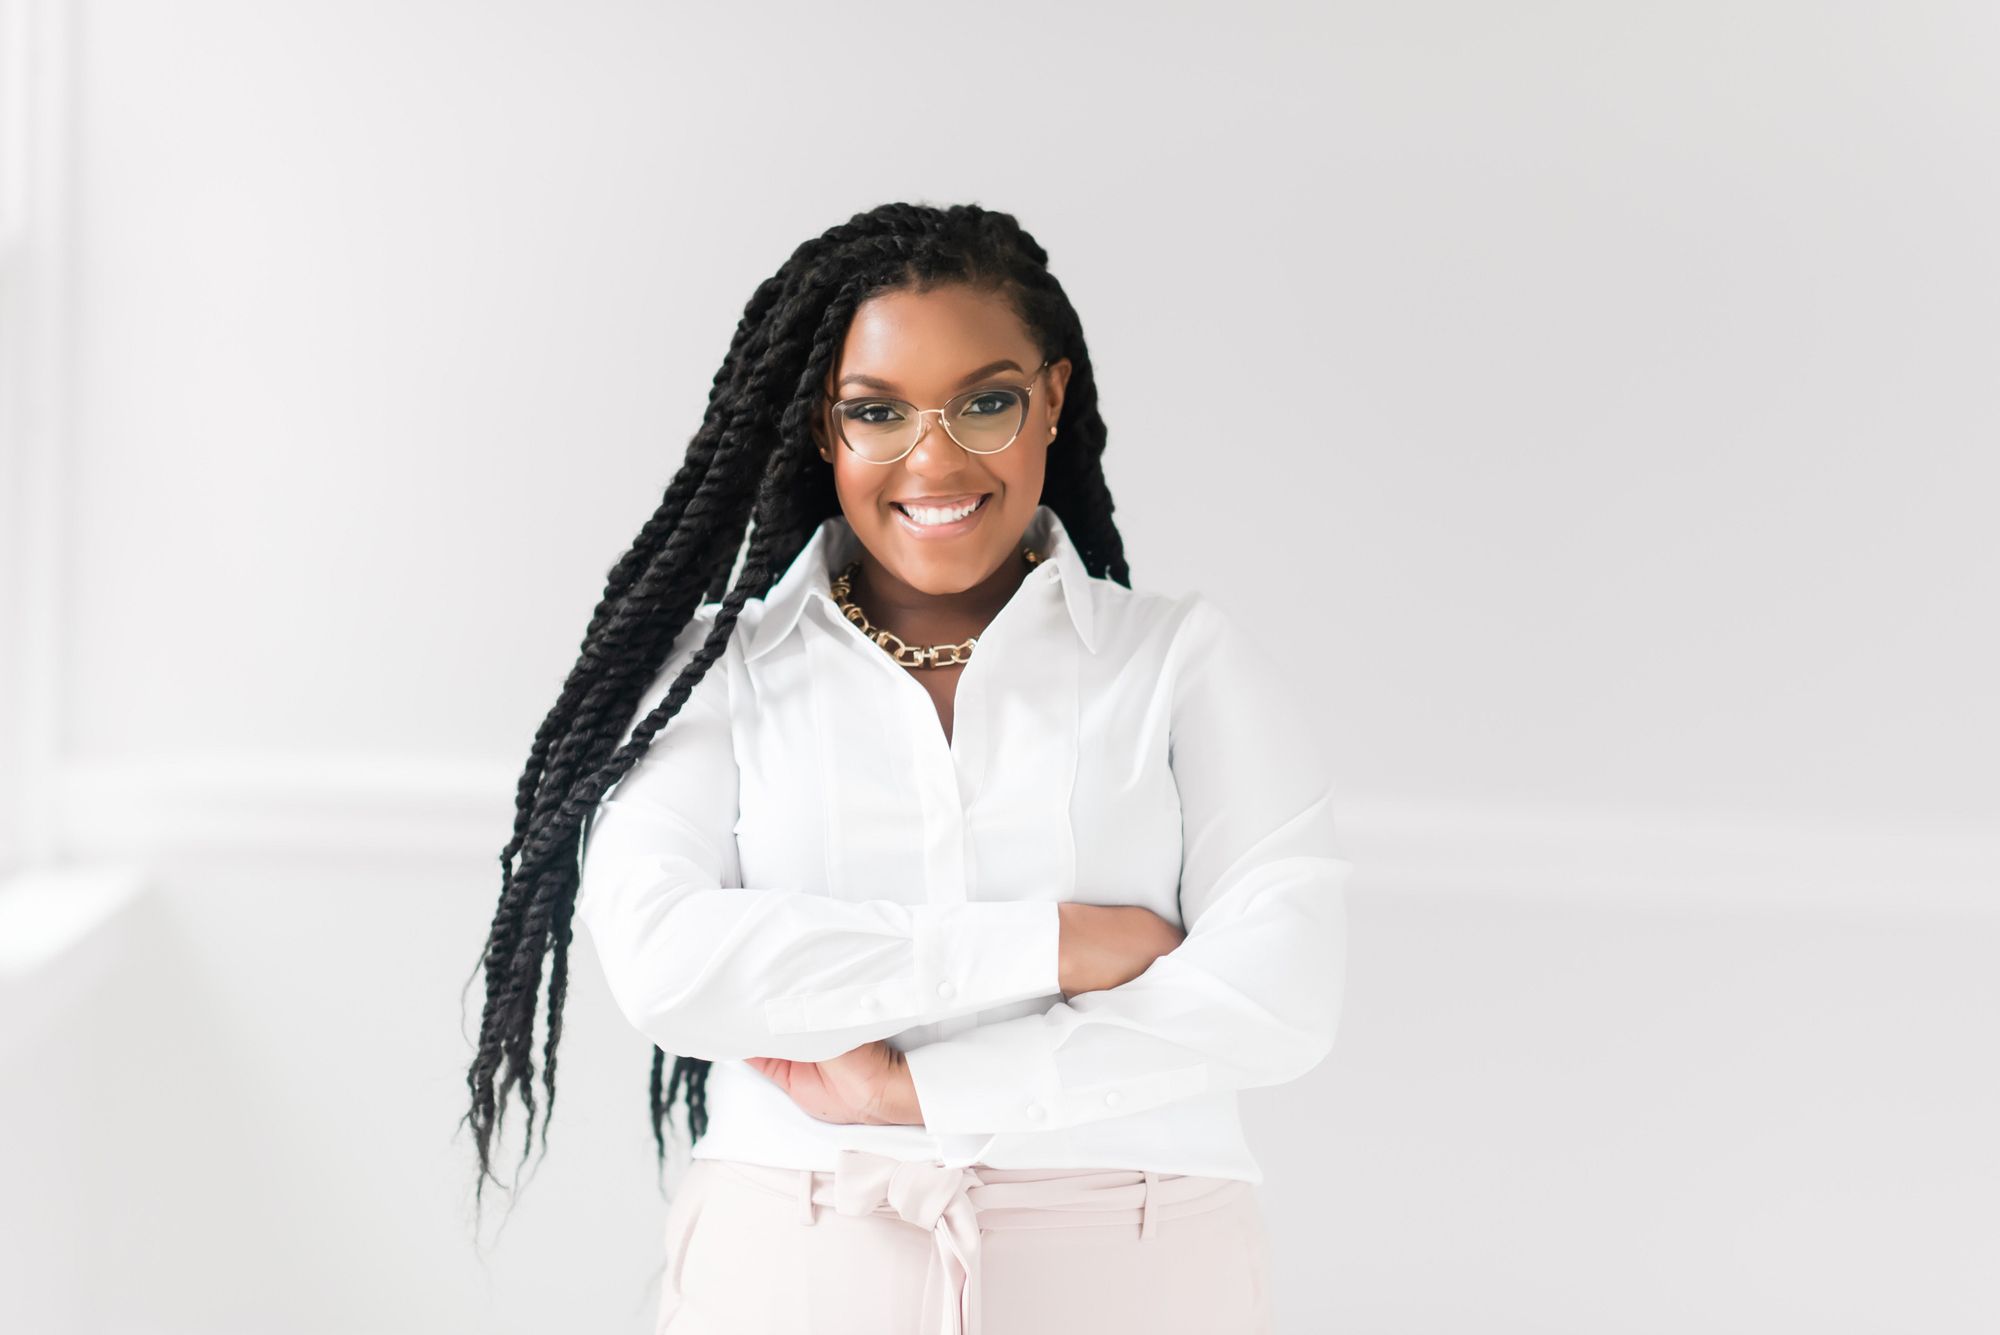 This Serial Entrepreneur Is Bringing Diversity & Inclusion to The Virtual Assistant Industry